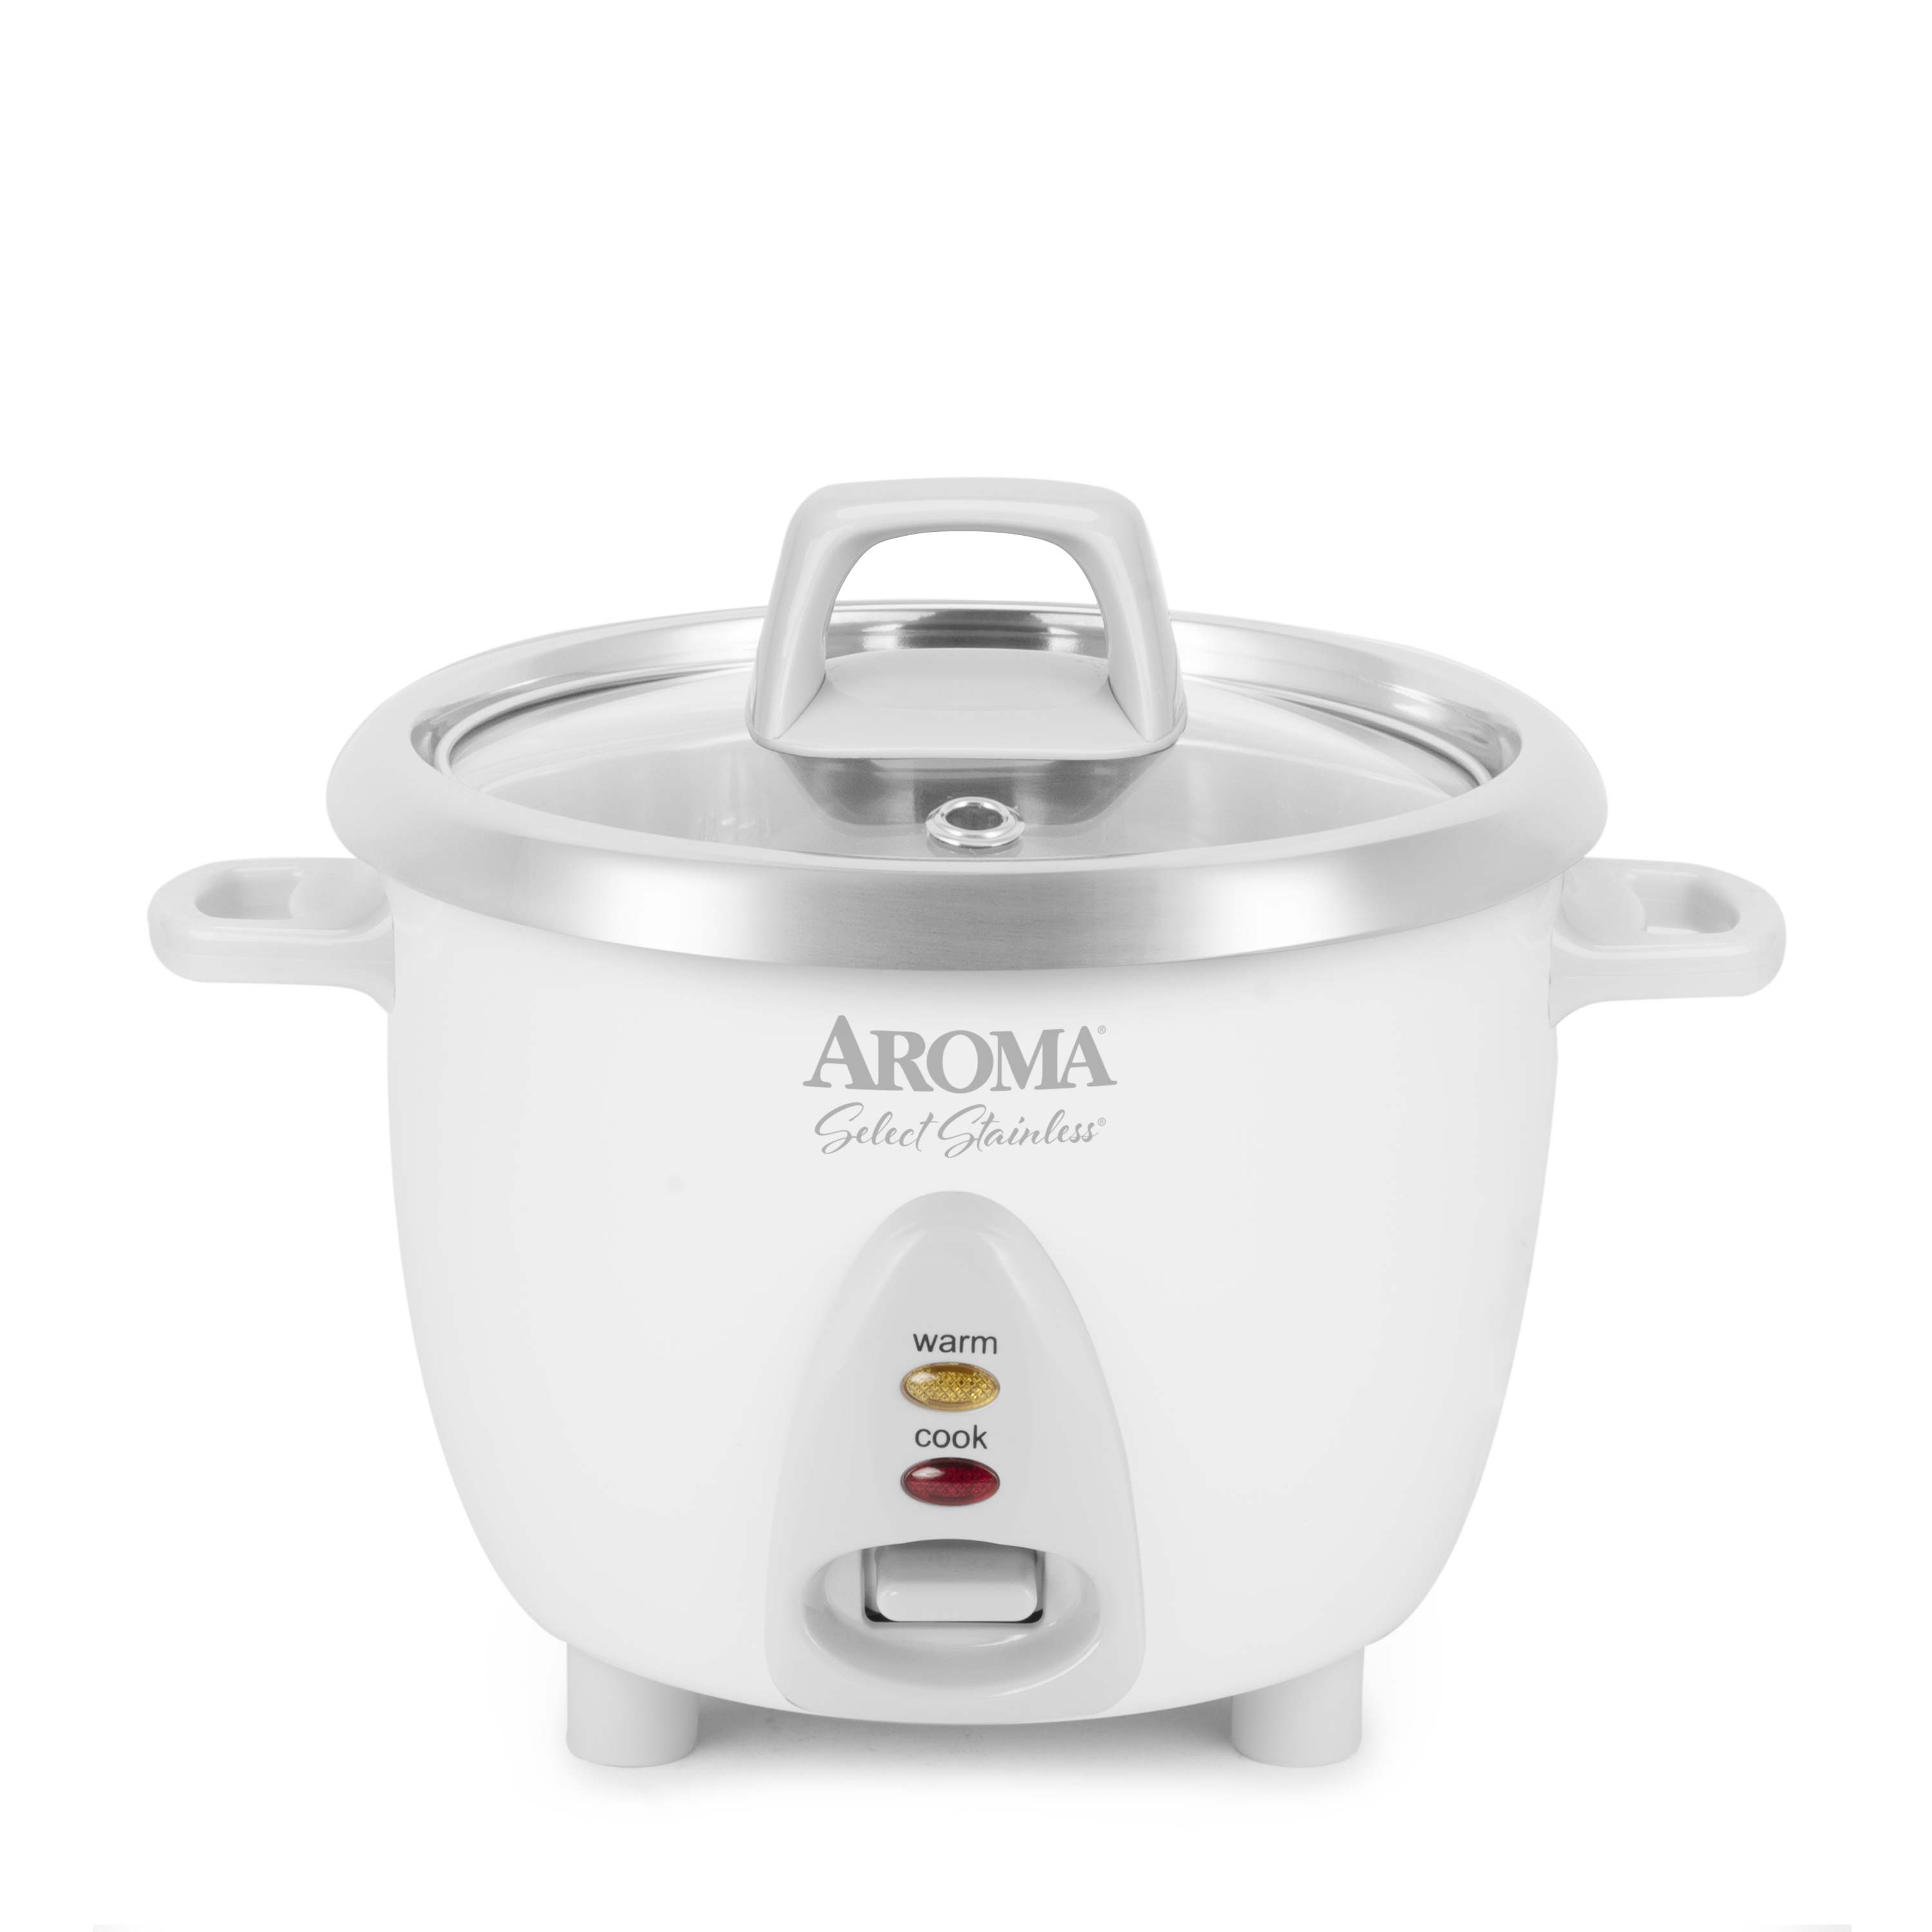 Aroma 6 Cup White Simply Stainless Pot - White - image 1 of 7